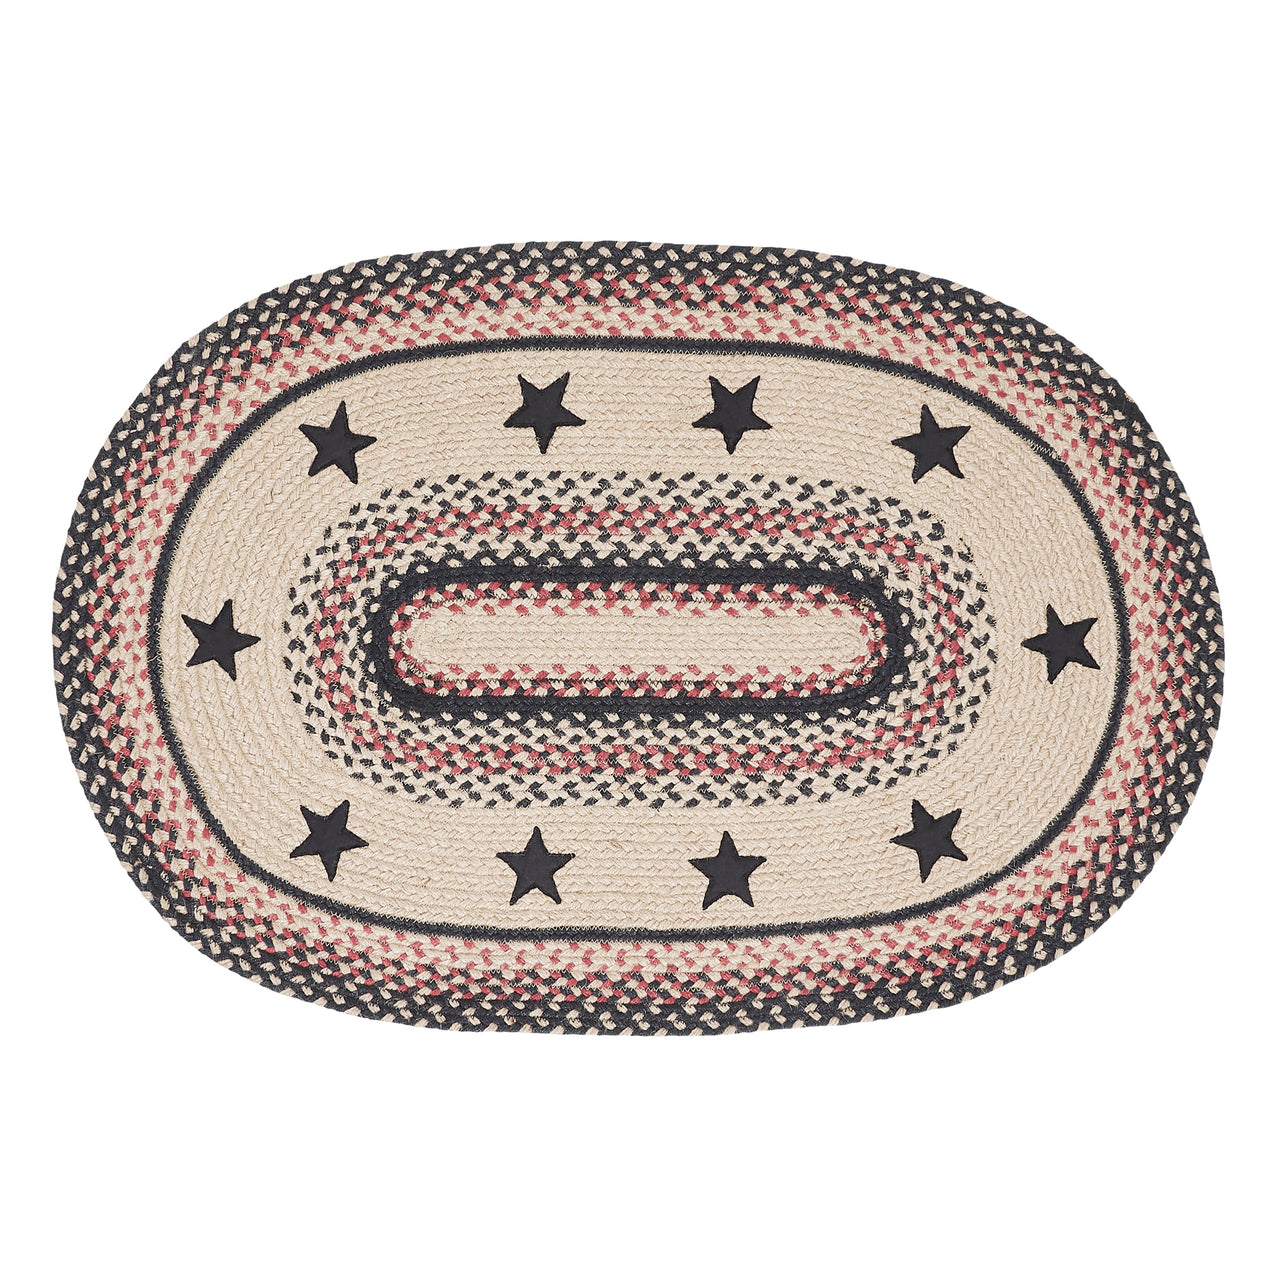 Colonial Star Jute Braided Rug Oval with Rug Pad 2'x3' VHC Brands